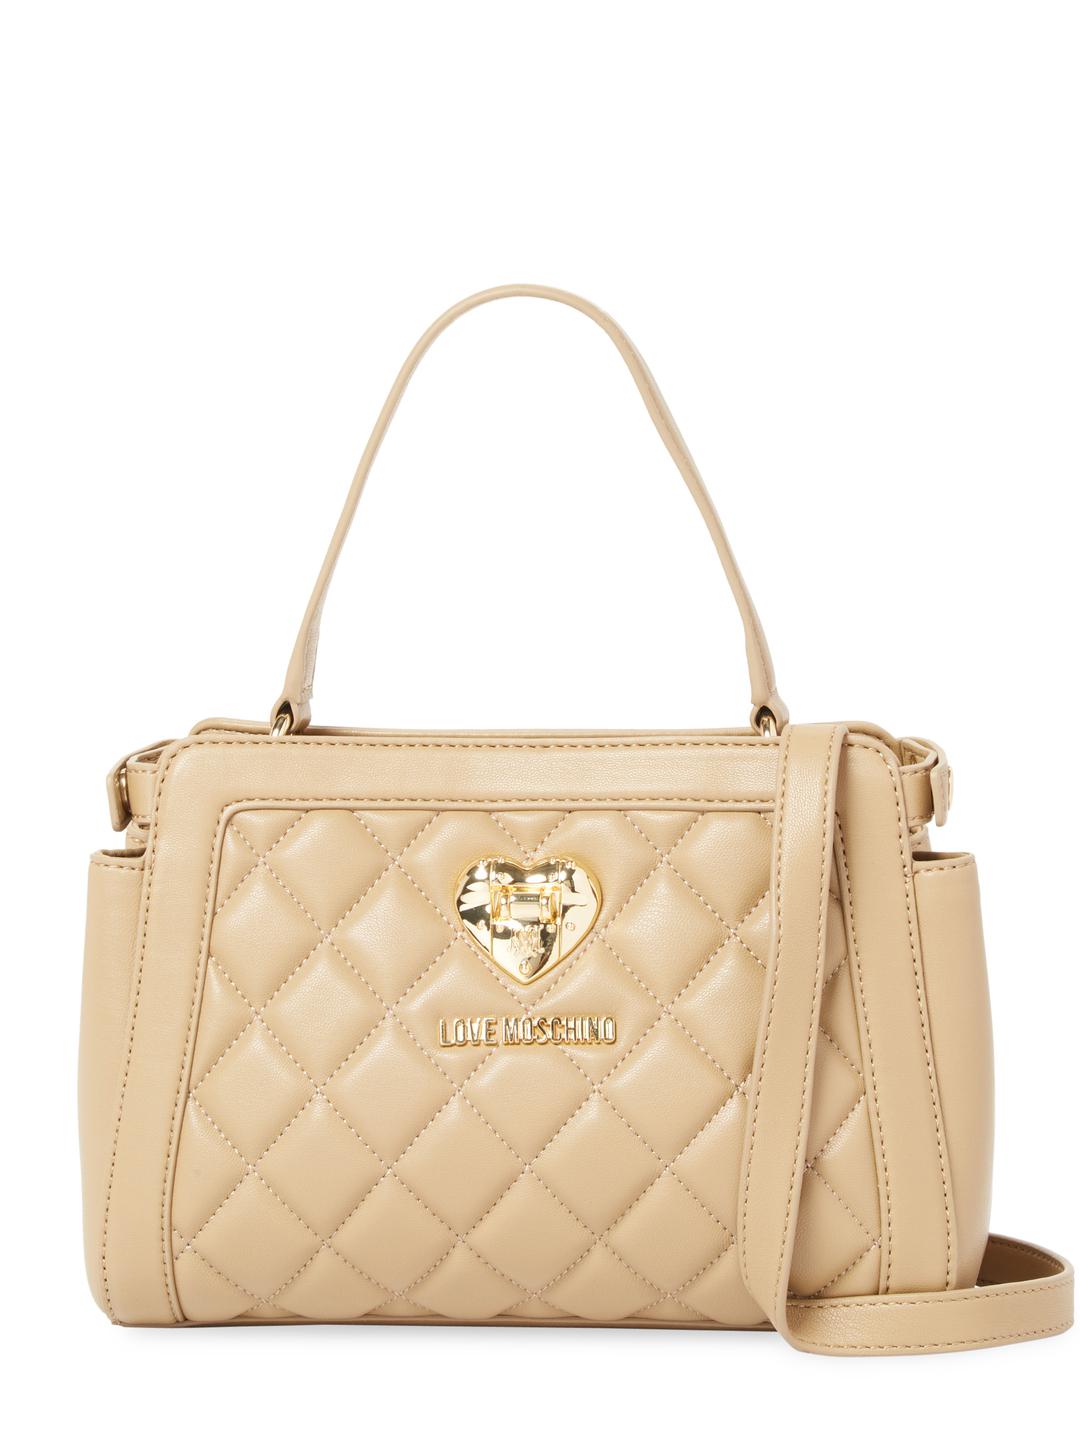 Carteras Mujer Love Moschino Quilted Nappa Pu